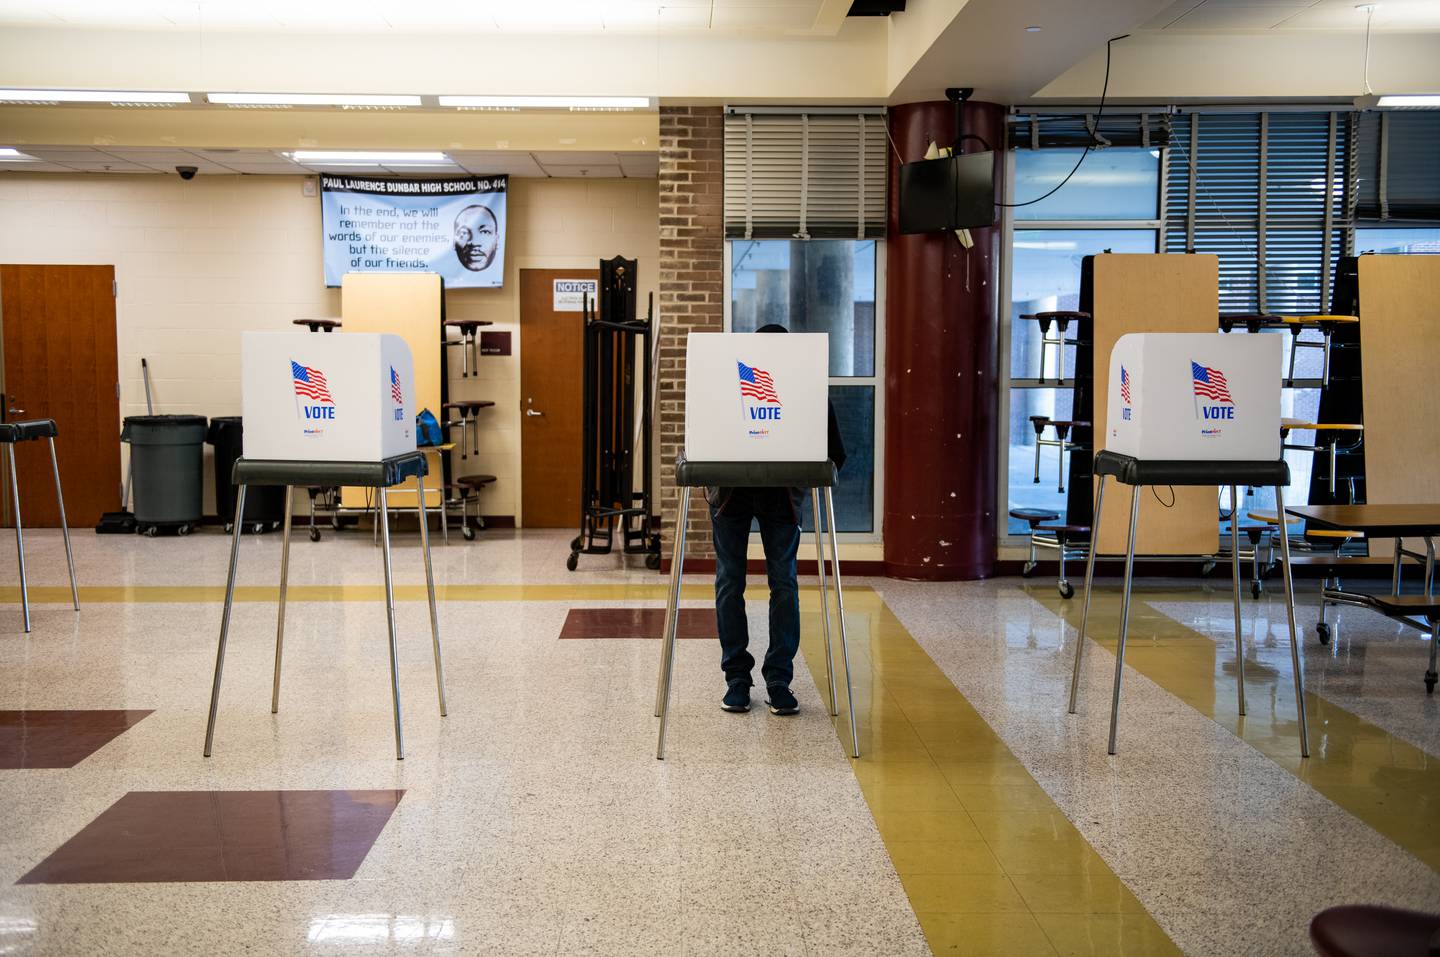 A person fills out their ballot at Paul Laurence Dunbar High School, in Baltimore, Md. on November 8, 2022.